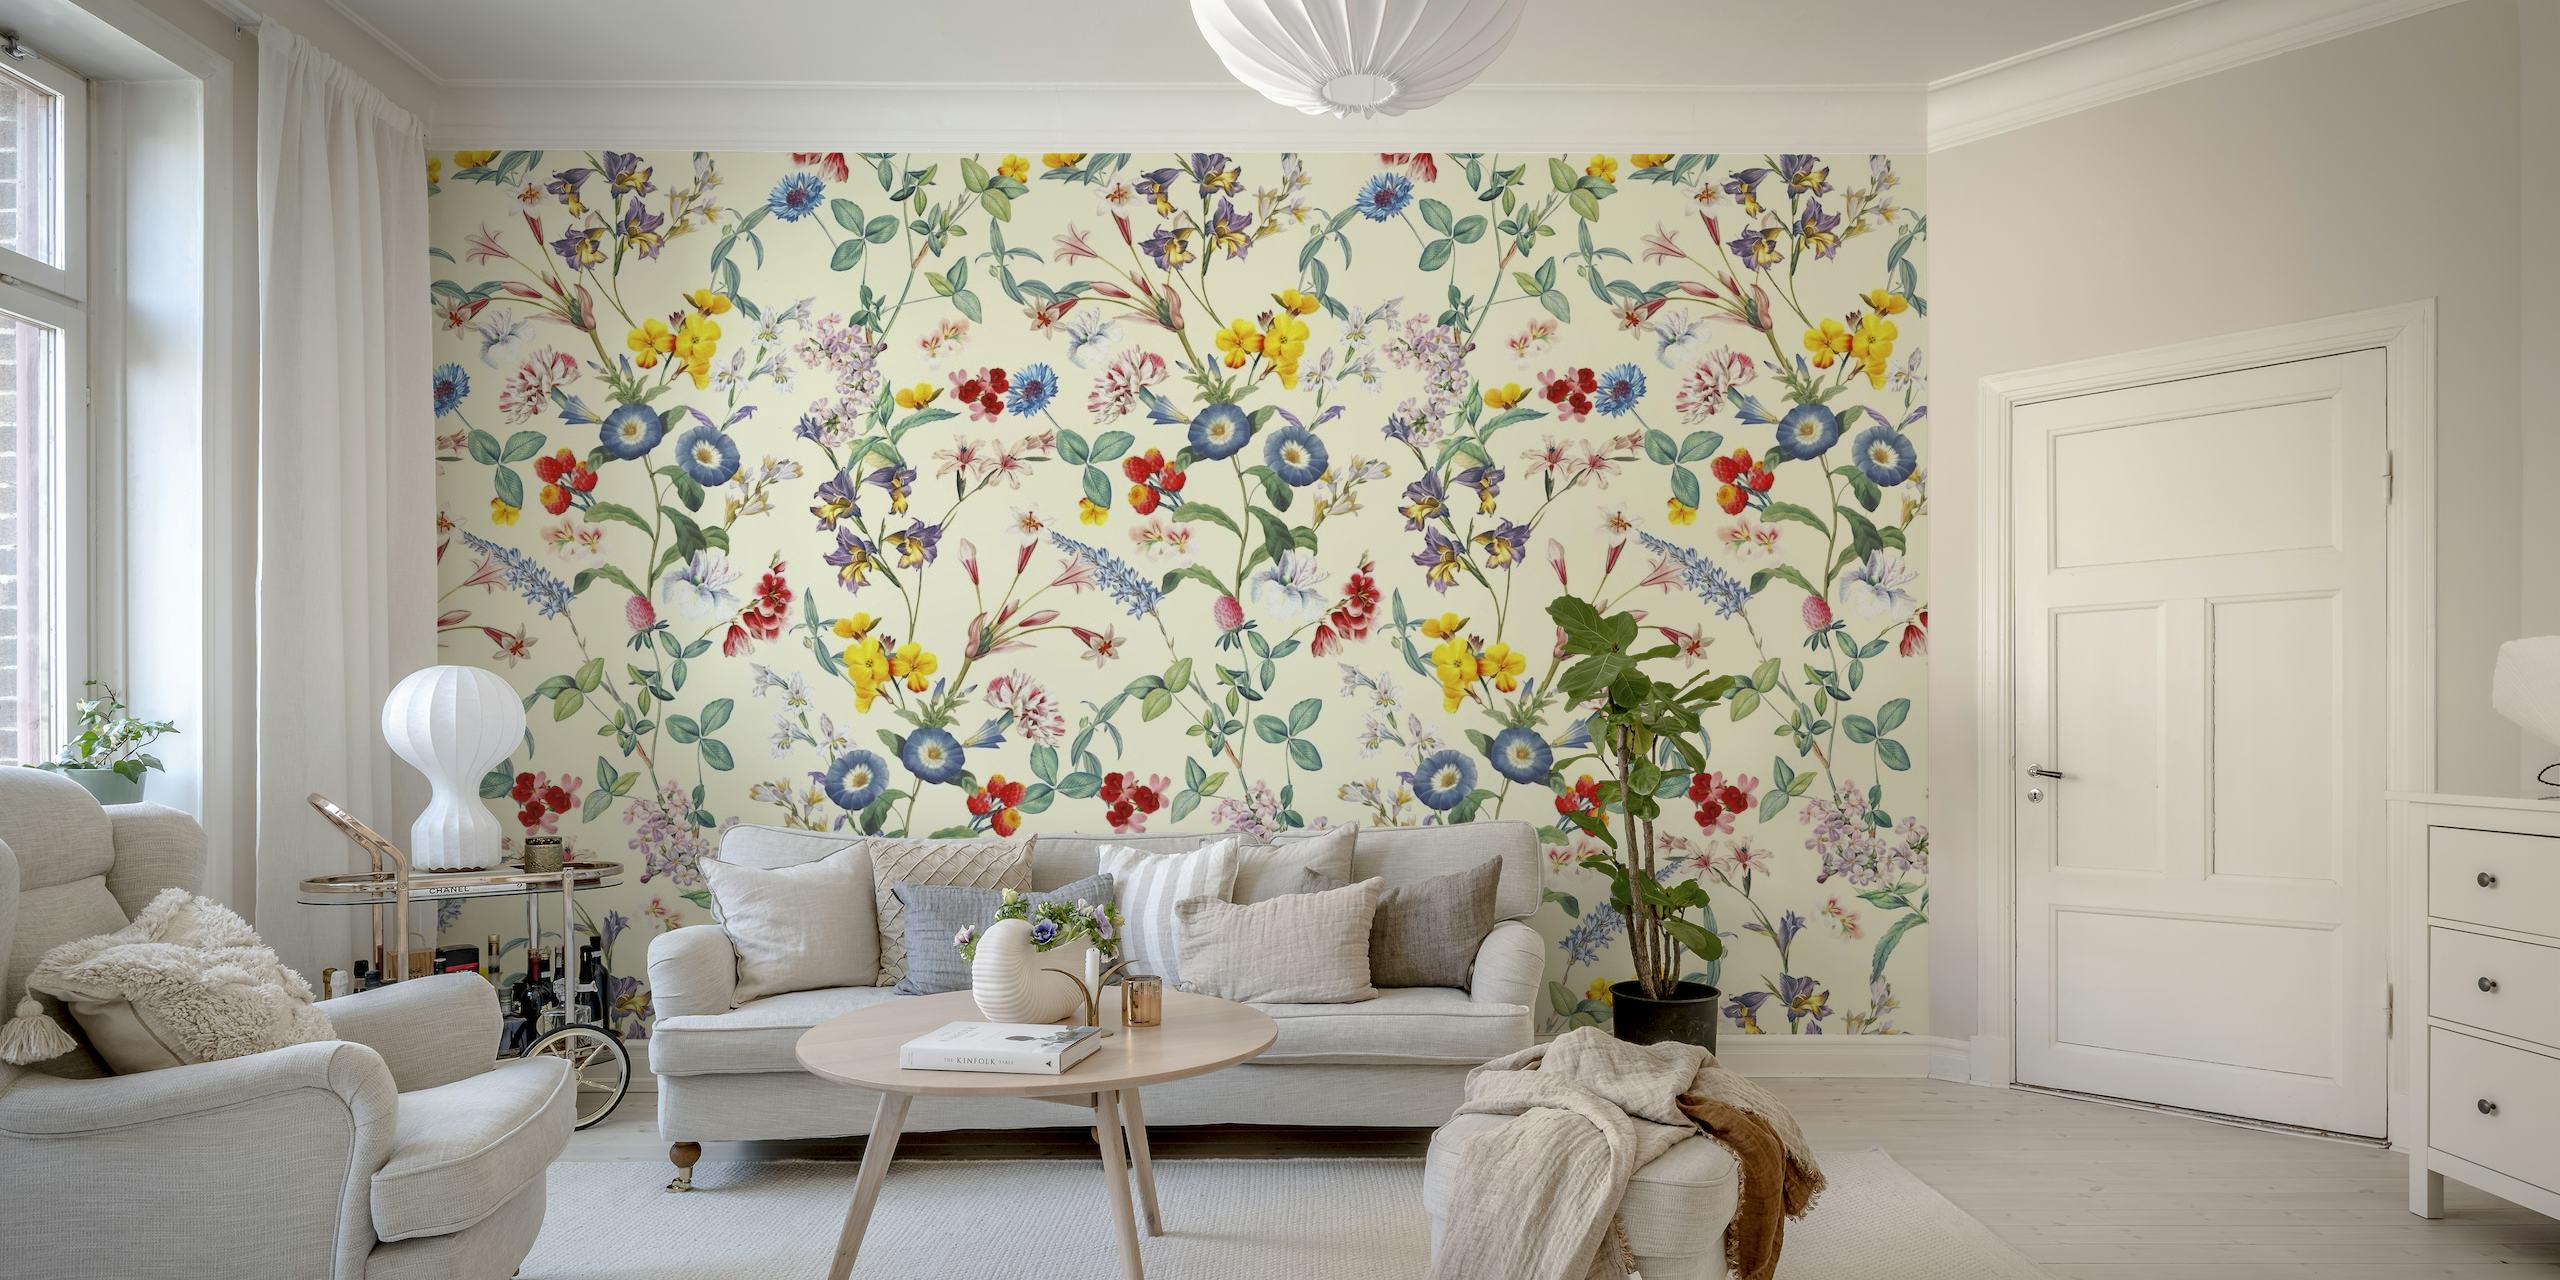 Colorful wildflower and butterfly pattern wall mural